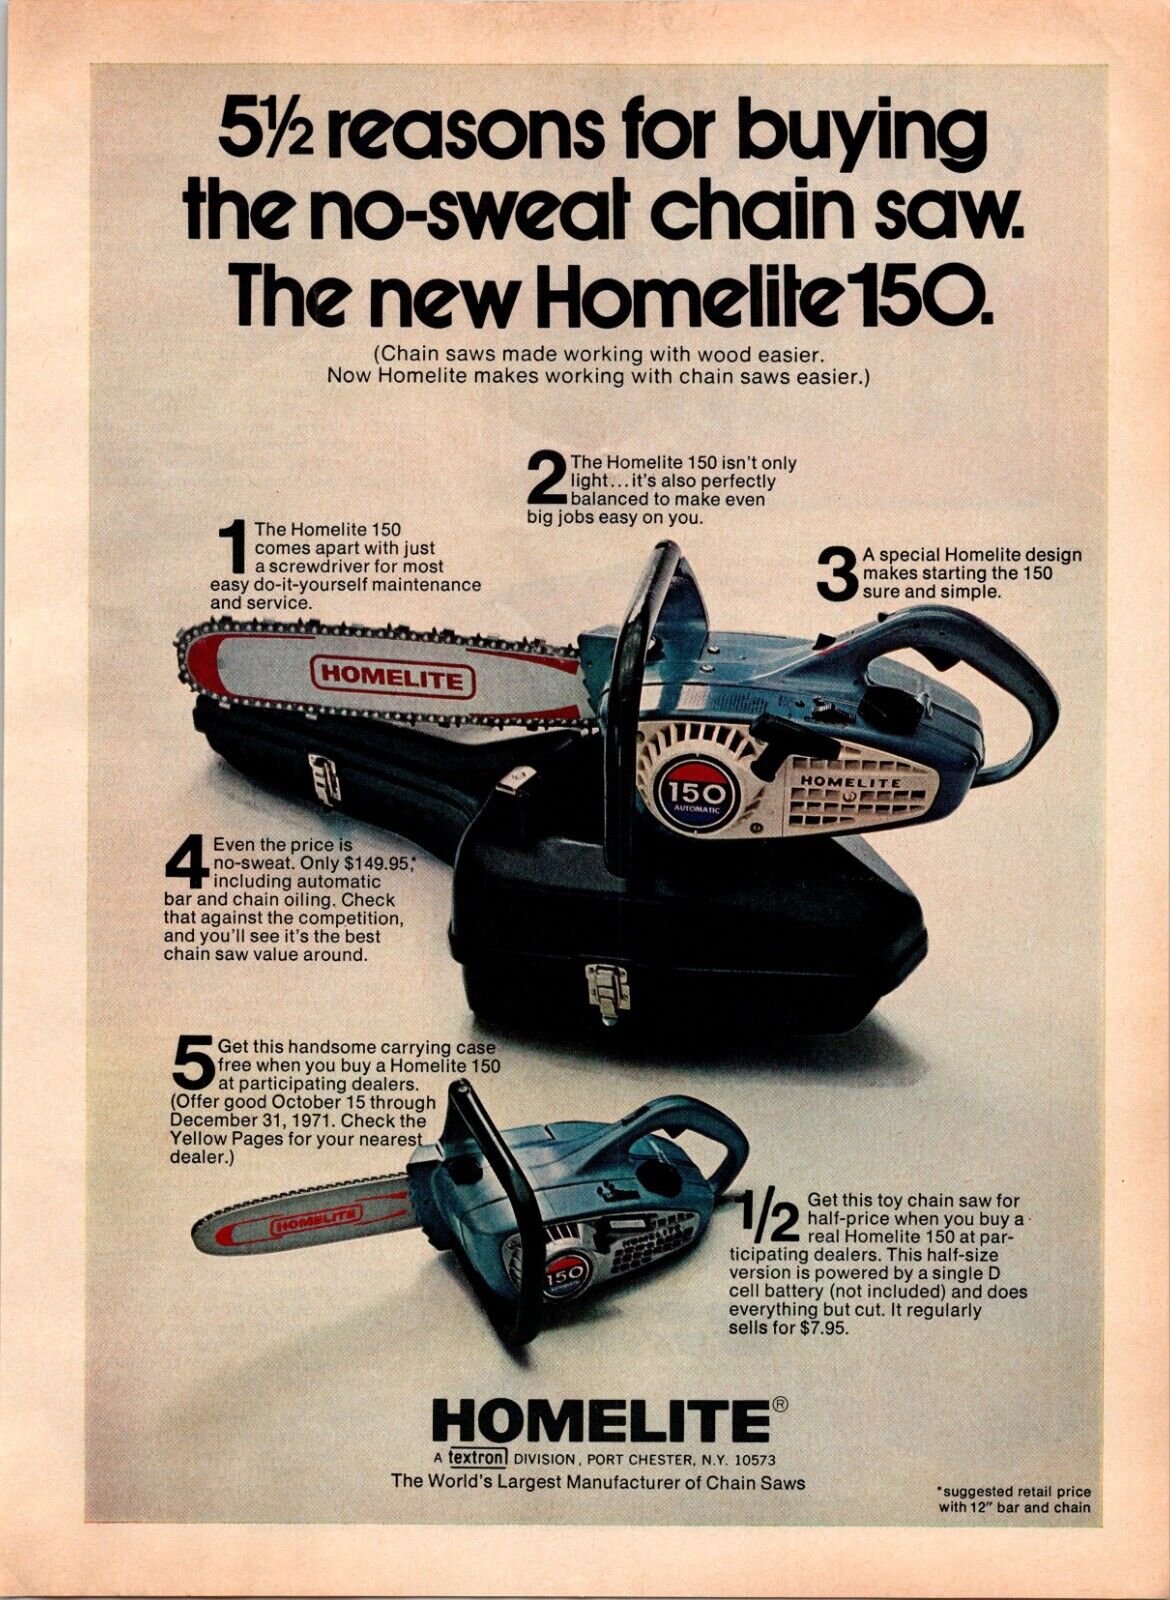 Homelite 150 Chainsaw-Get Toy Chainsaw At Half Price-Vintage Print Ad